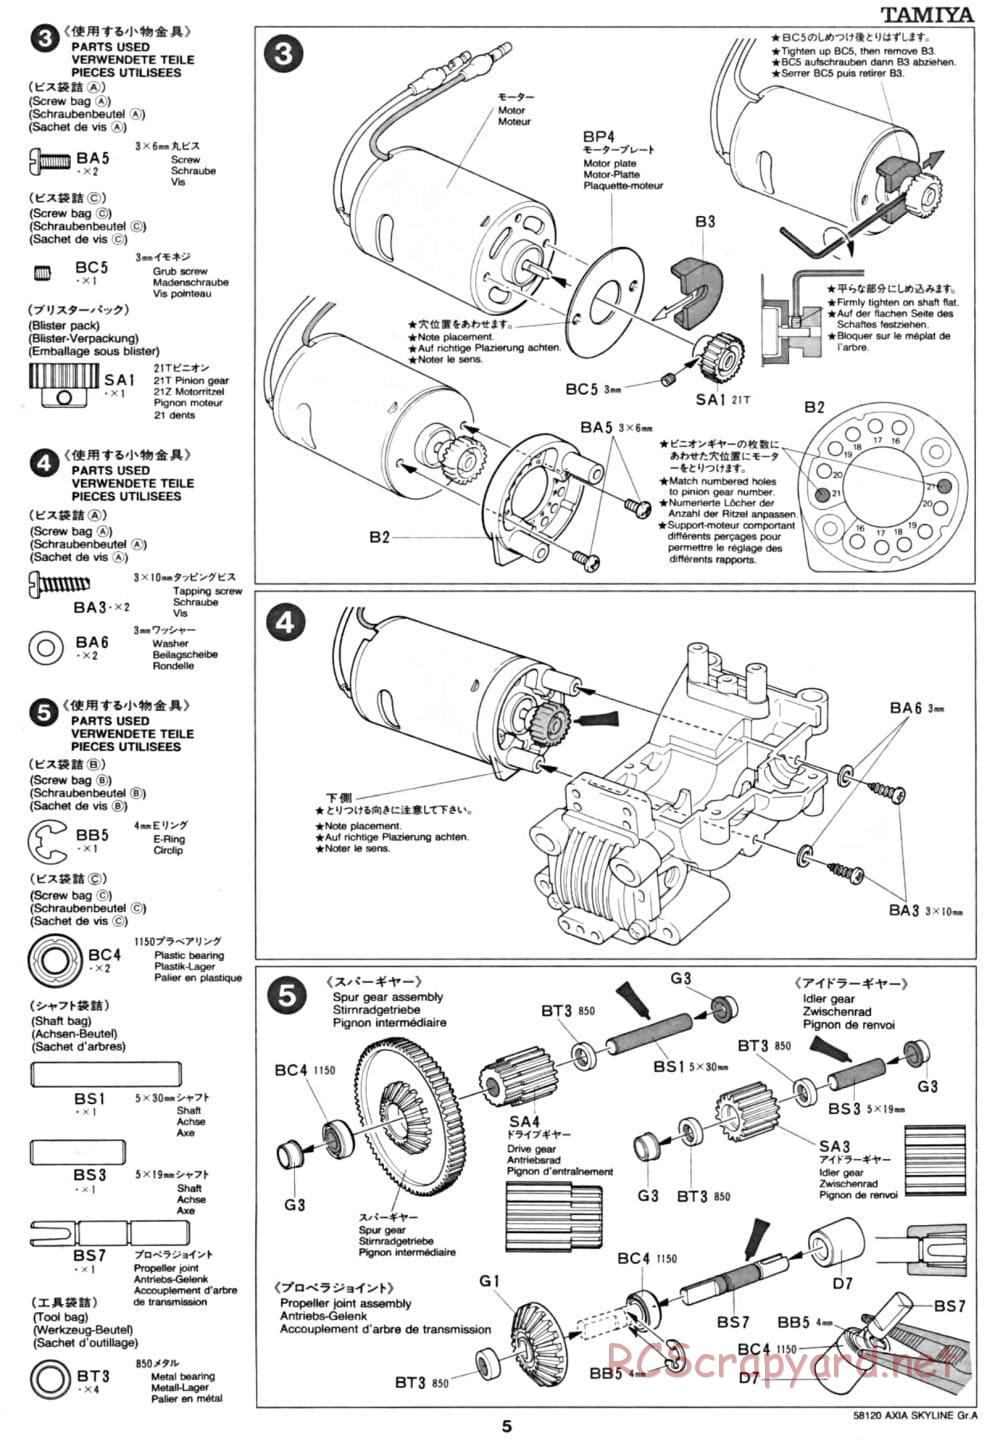 Tamiya - Axia Skyline GT-R Gr.A - TA-01 Chassis - Manual - Page 5